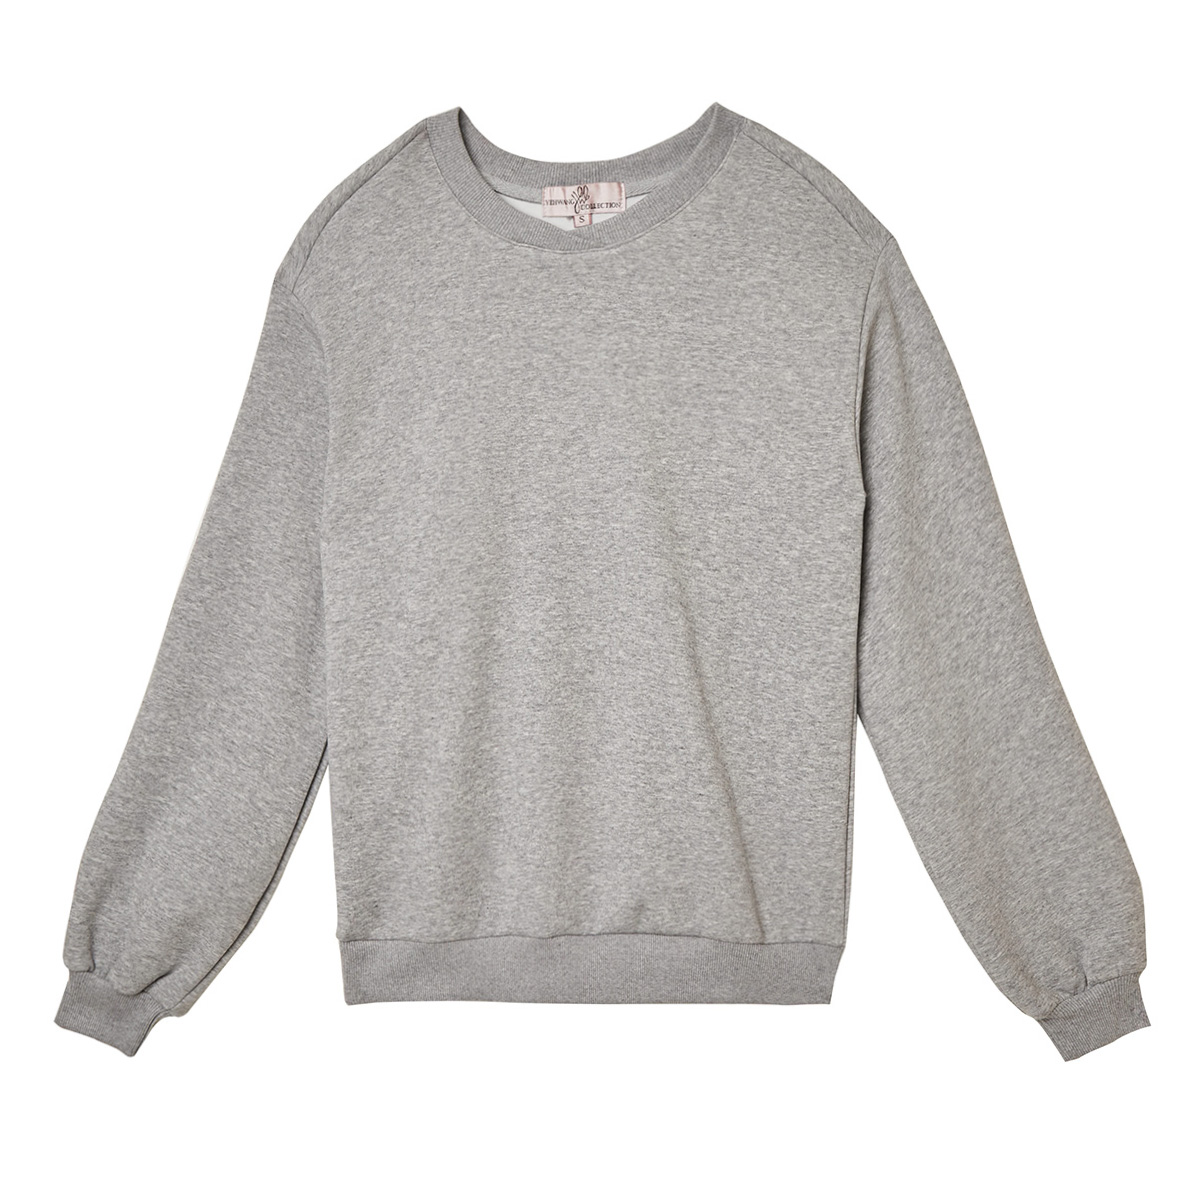 Bequeme pullover-loungewear